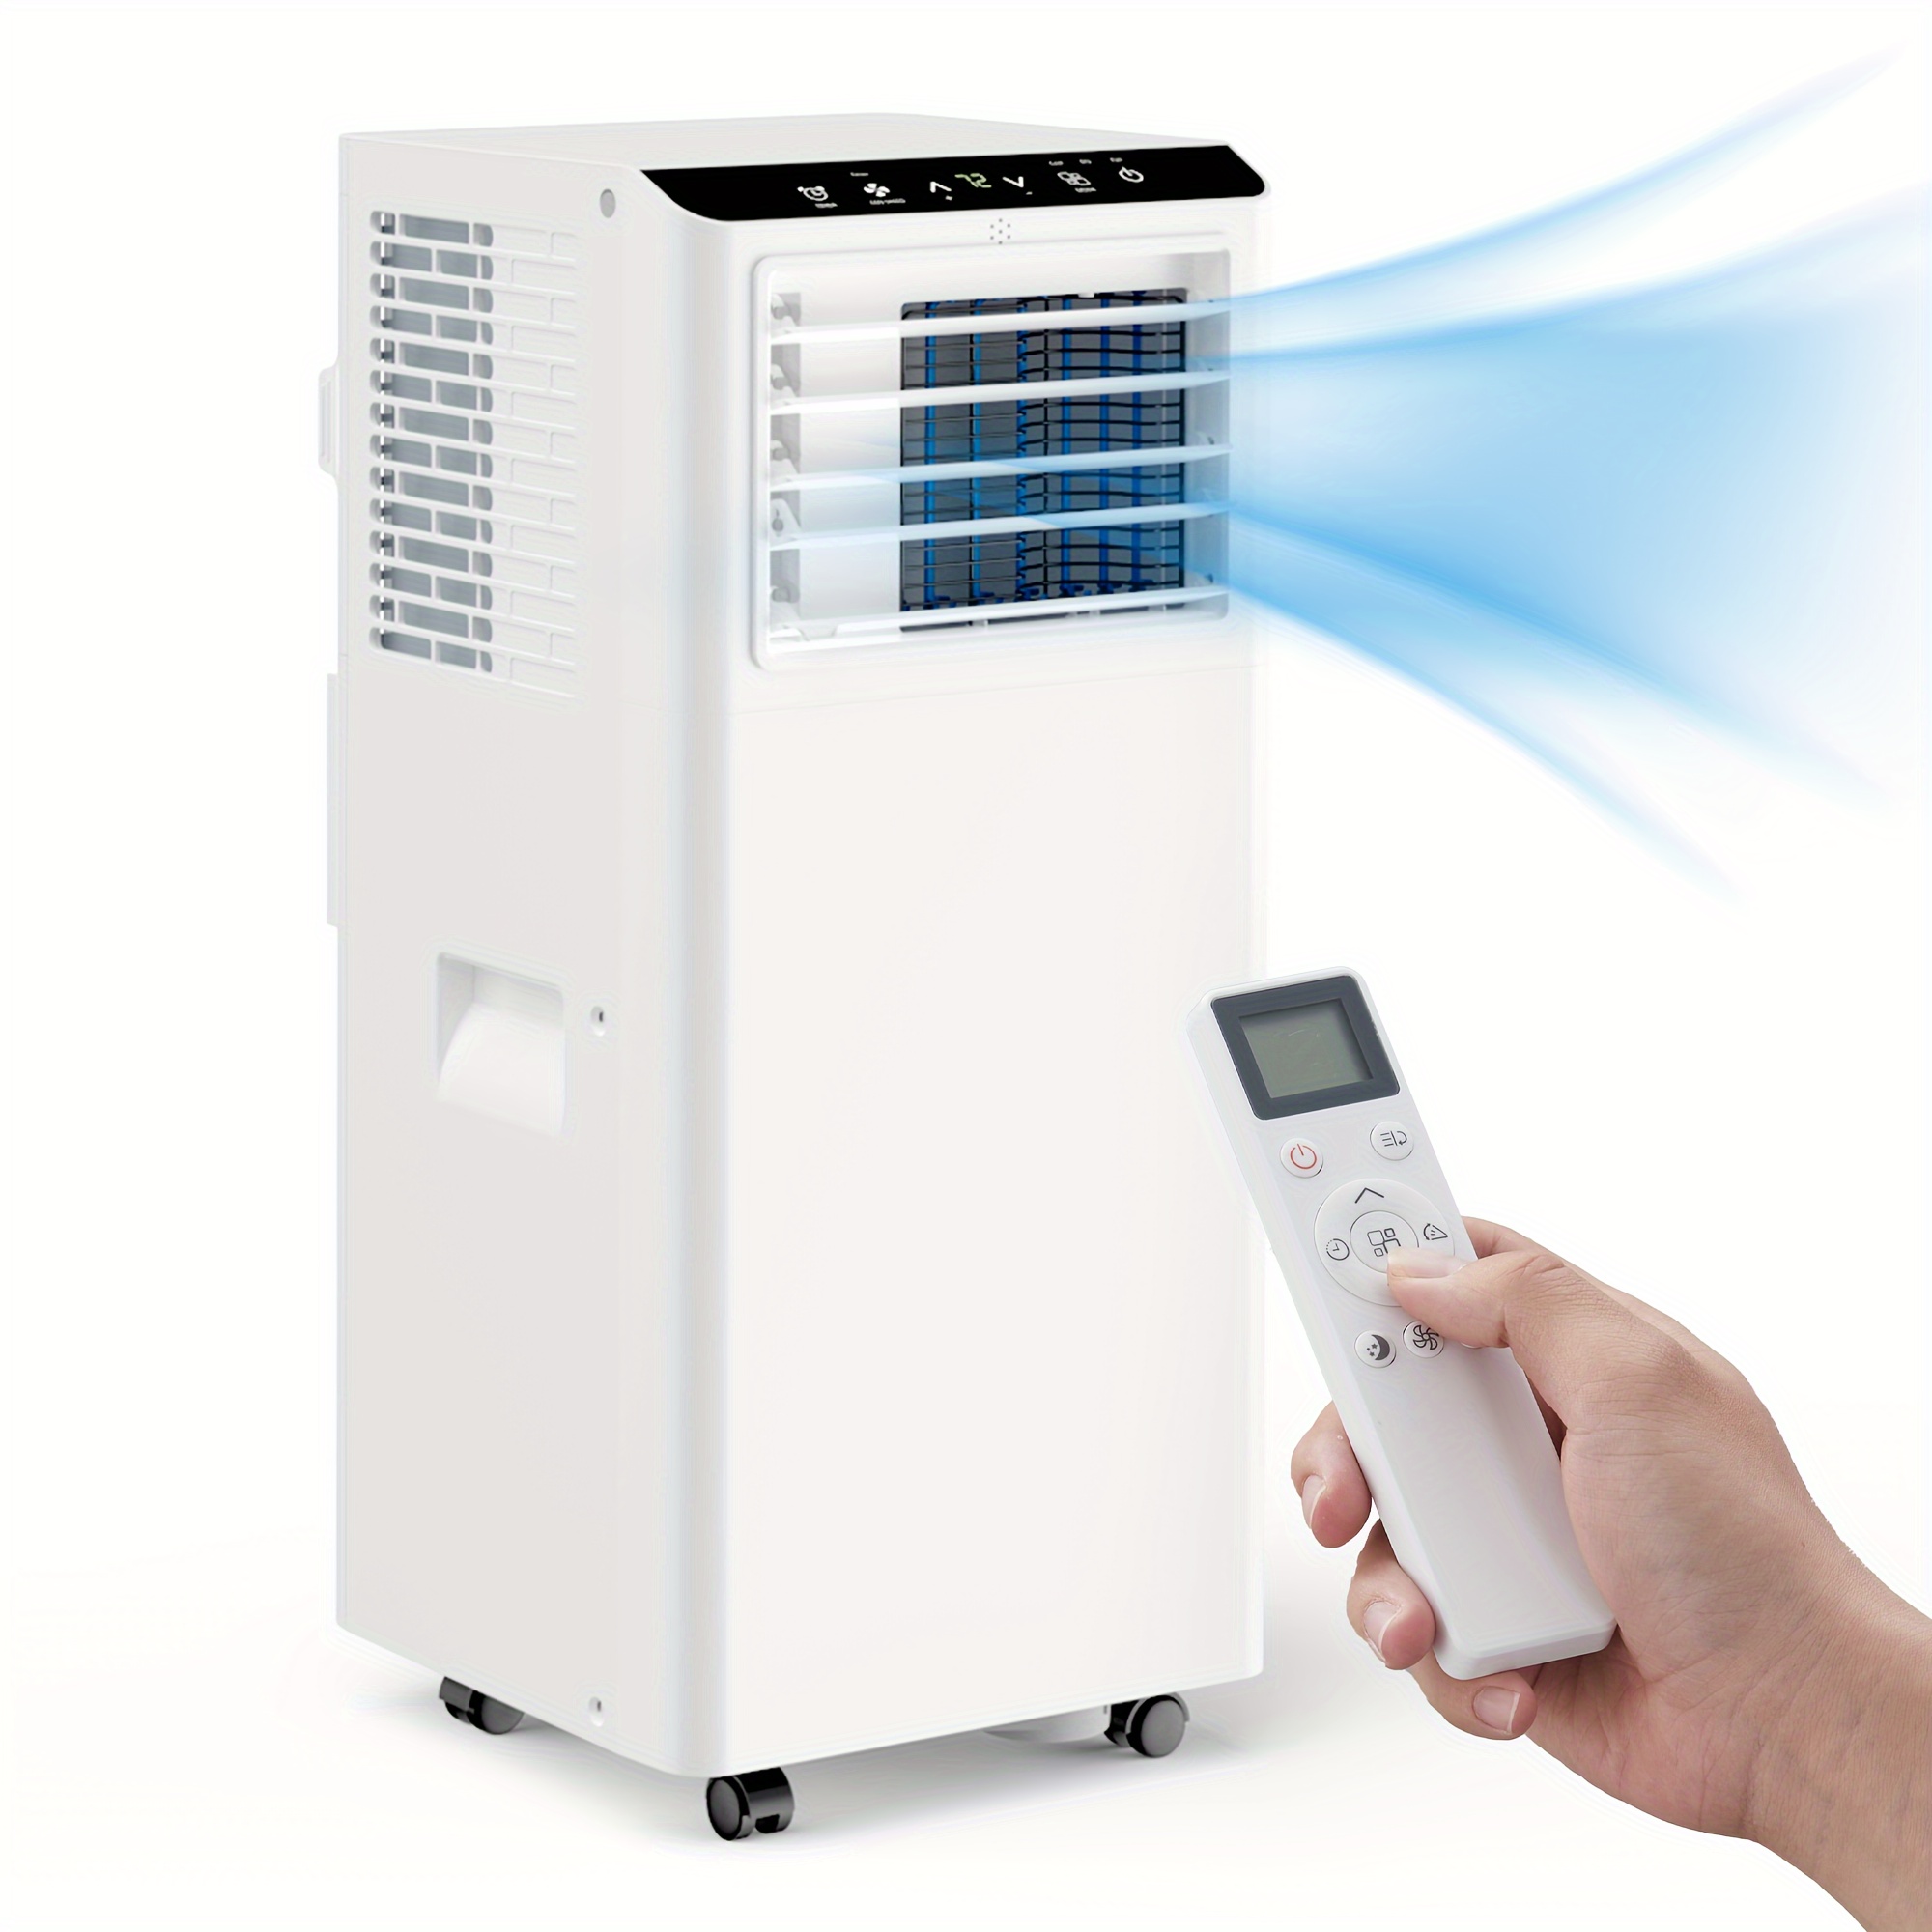 

8000 Btu With Lcd Display Remote Control, Cooling Up To 350 Sq. Ft.3 In 1 Ac Cooling/ Dehumidifying/ Fan/ Timer And Window Kit For Bedroom, Office